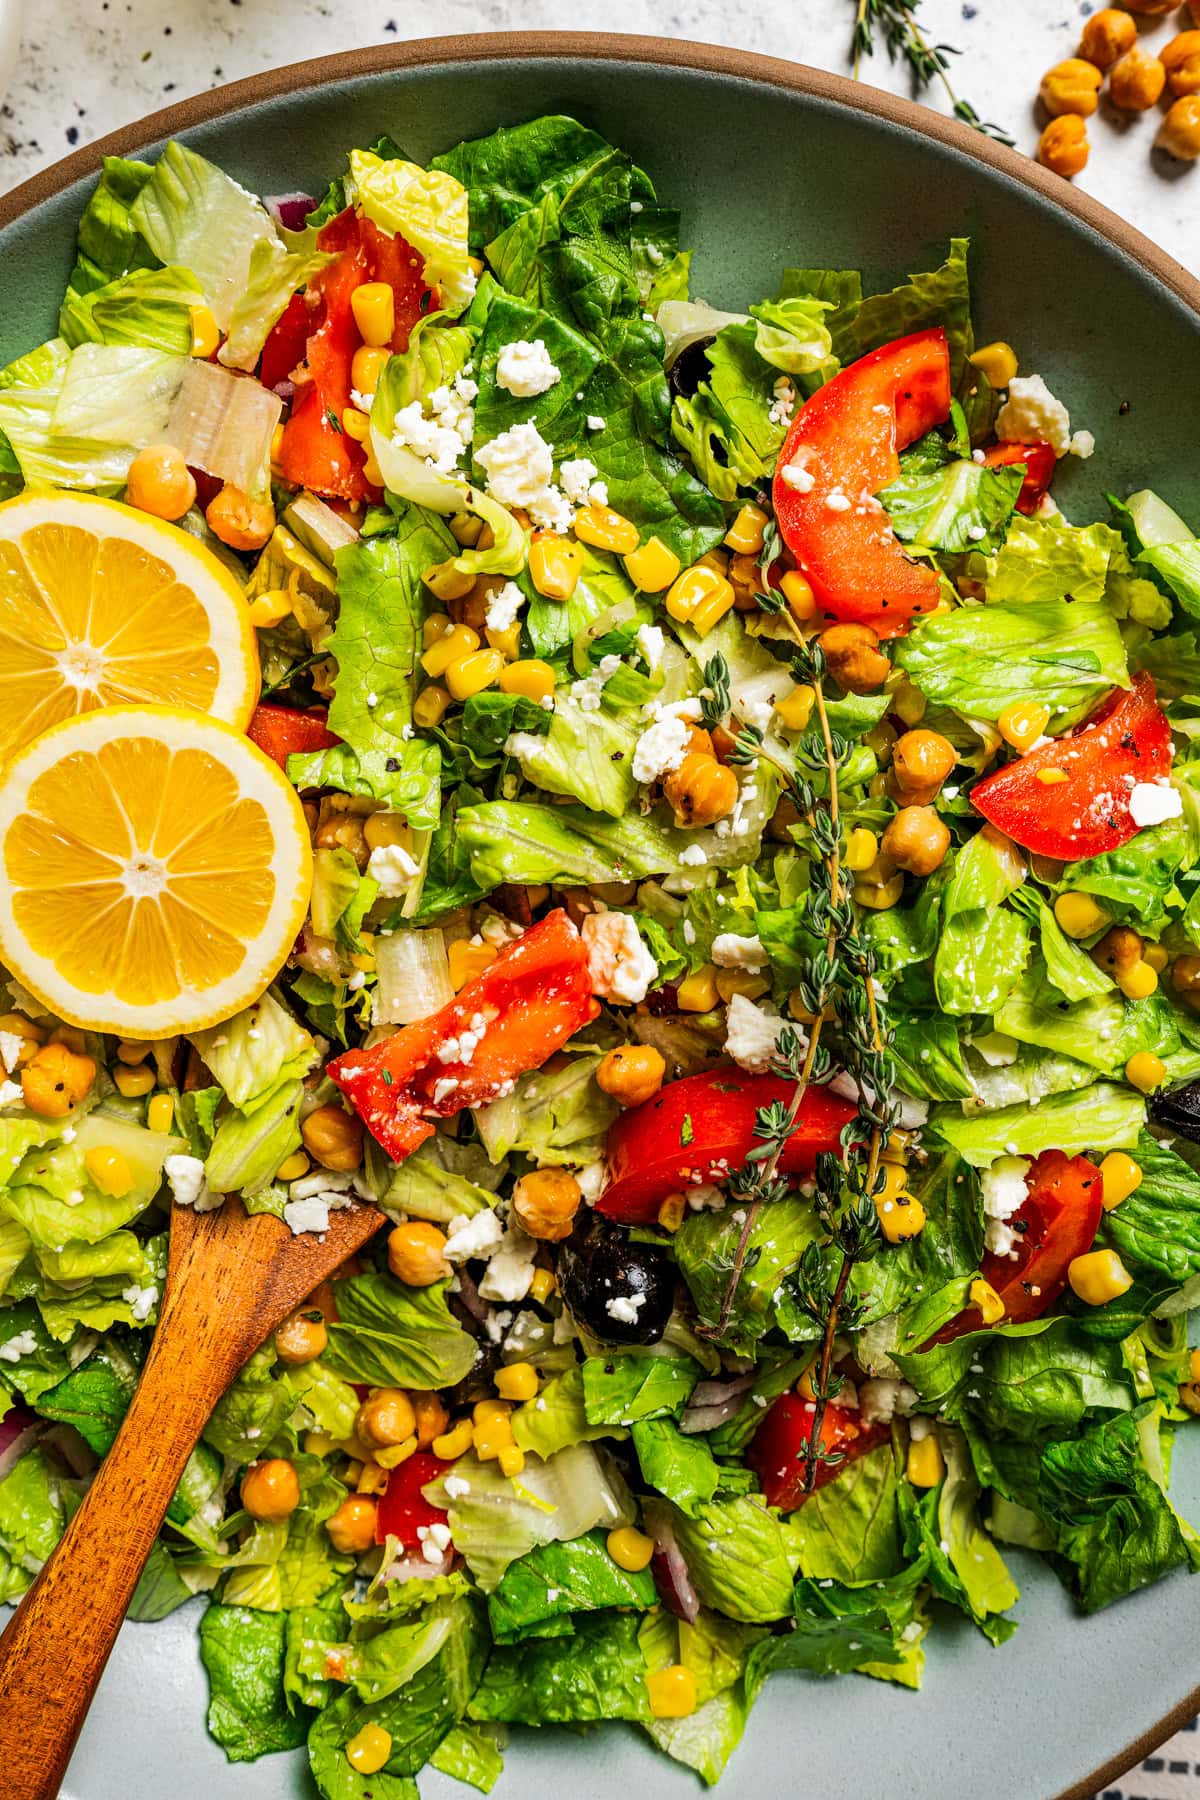 Close-up shot of a Mediterranean salad with lettuce, tomatoes, corn kernels, chickpeas, and lemon slices.